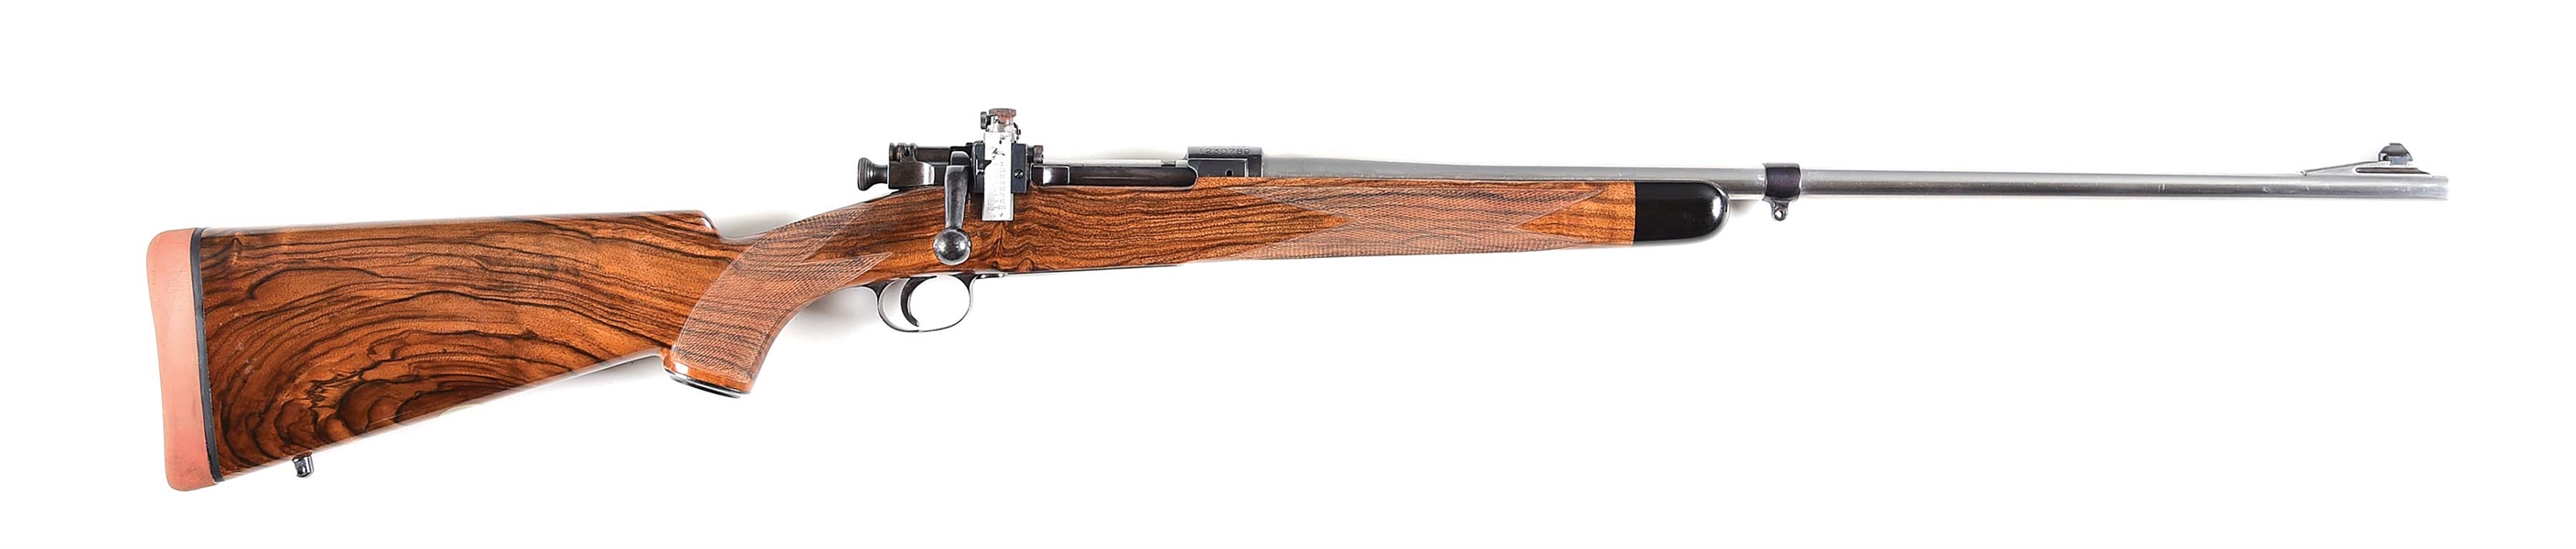 (C) GRIFFIN AND HOWE SPRINGFIELD 1903 BOLT ACTION RIFLE.